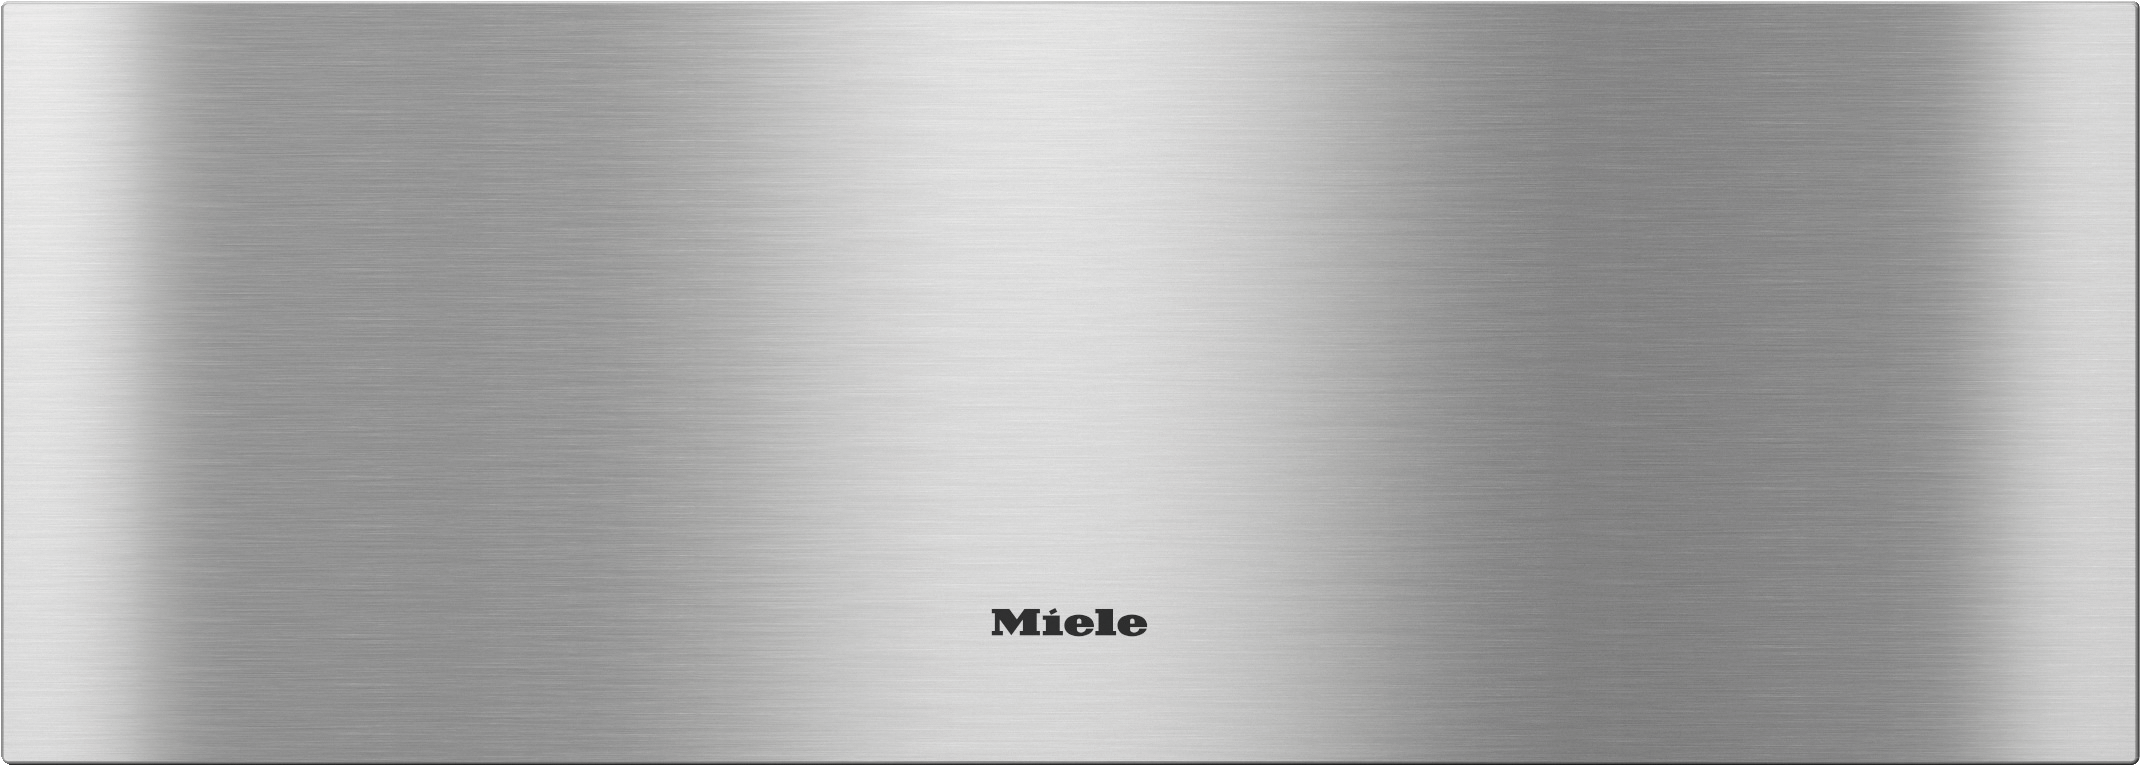 Miele ESW7580 STAINLESS STEEL   Handleless Gourmet Warming Drawer, 30-